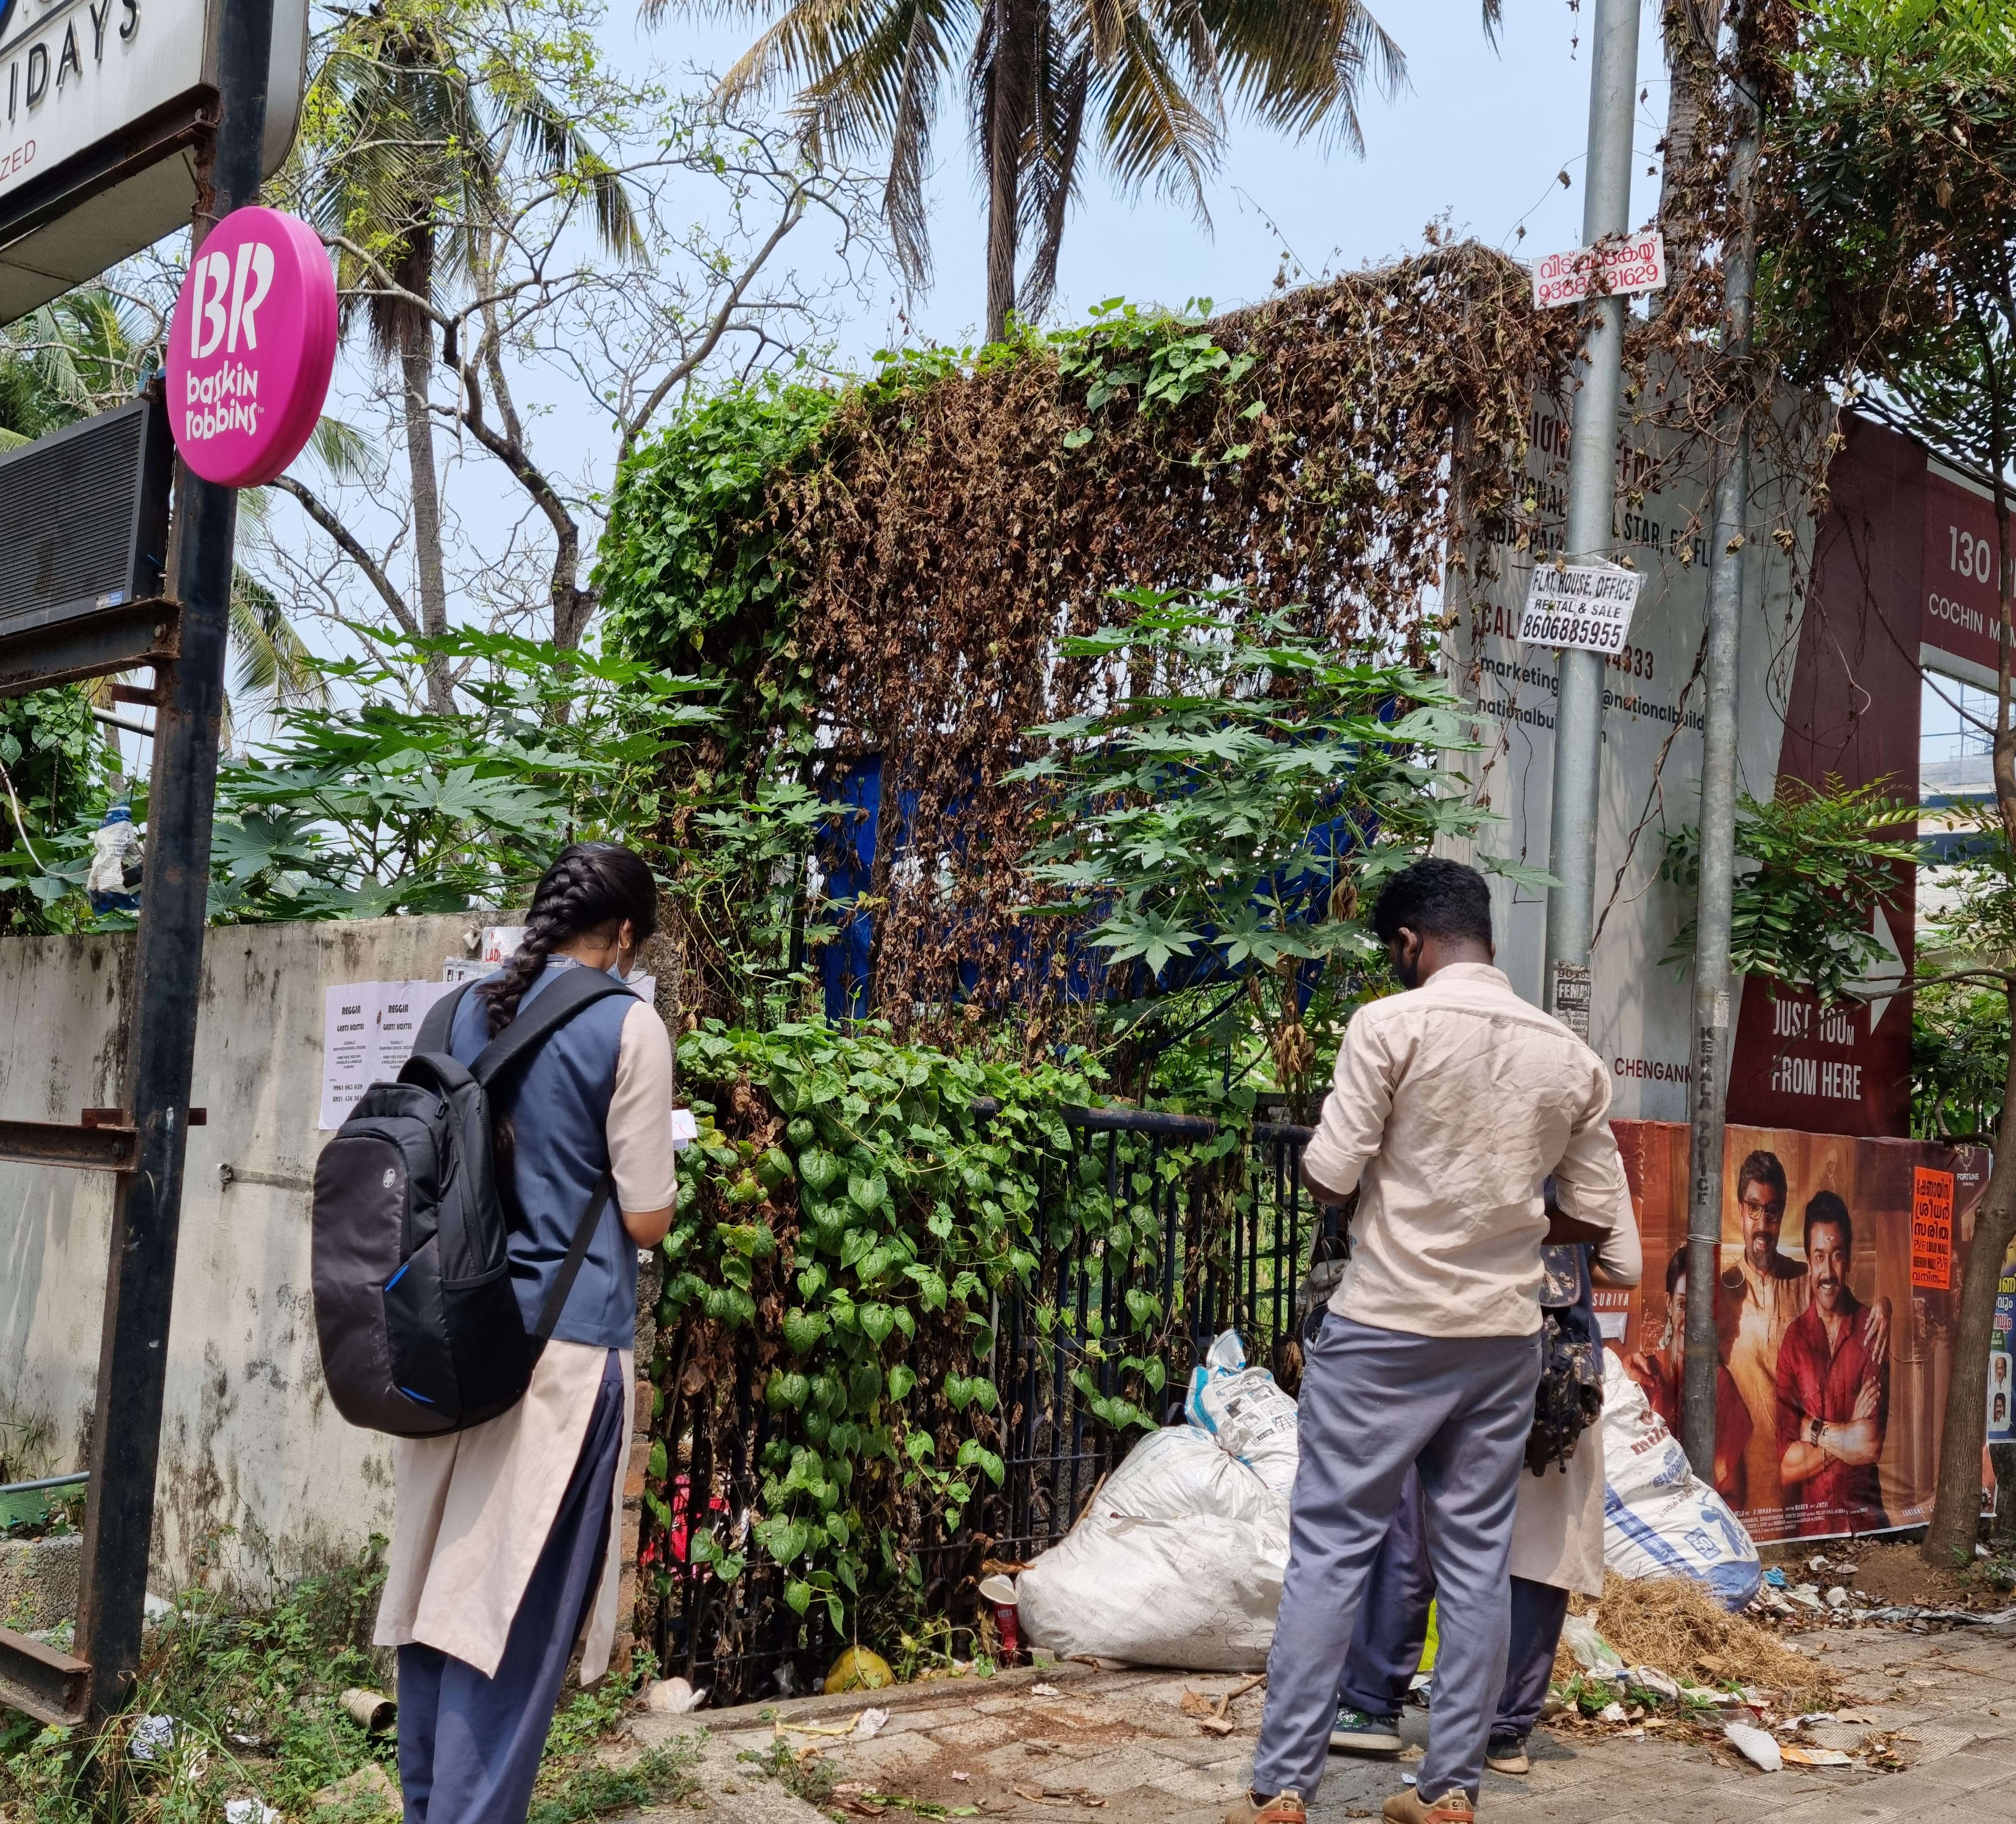 A man and woman examine a derelict, overgrown building in Kochi, India.